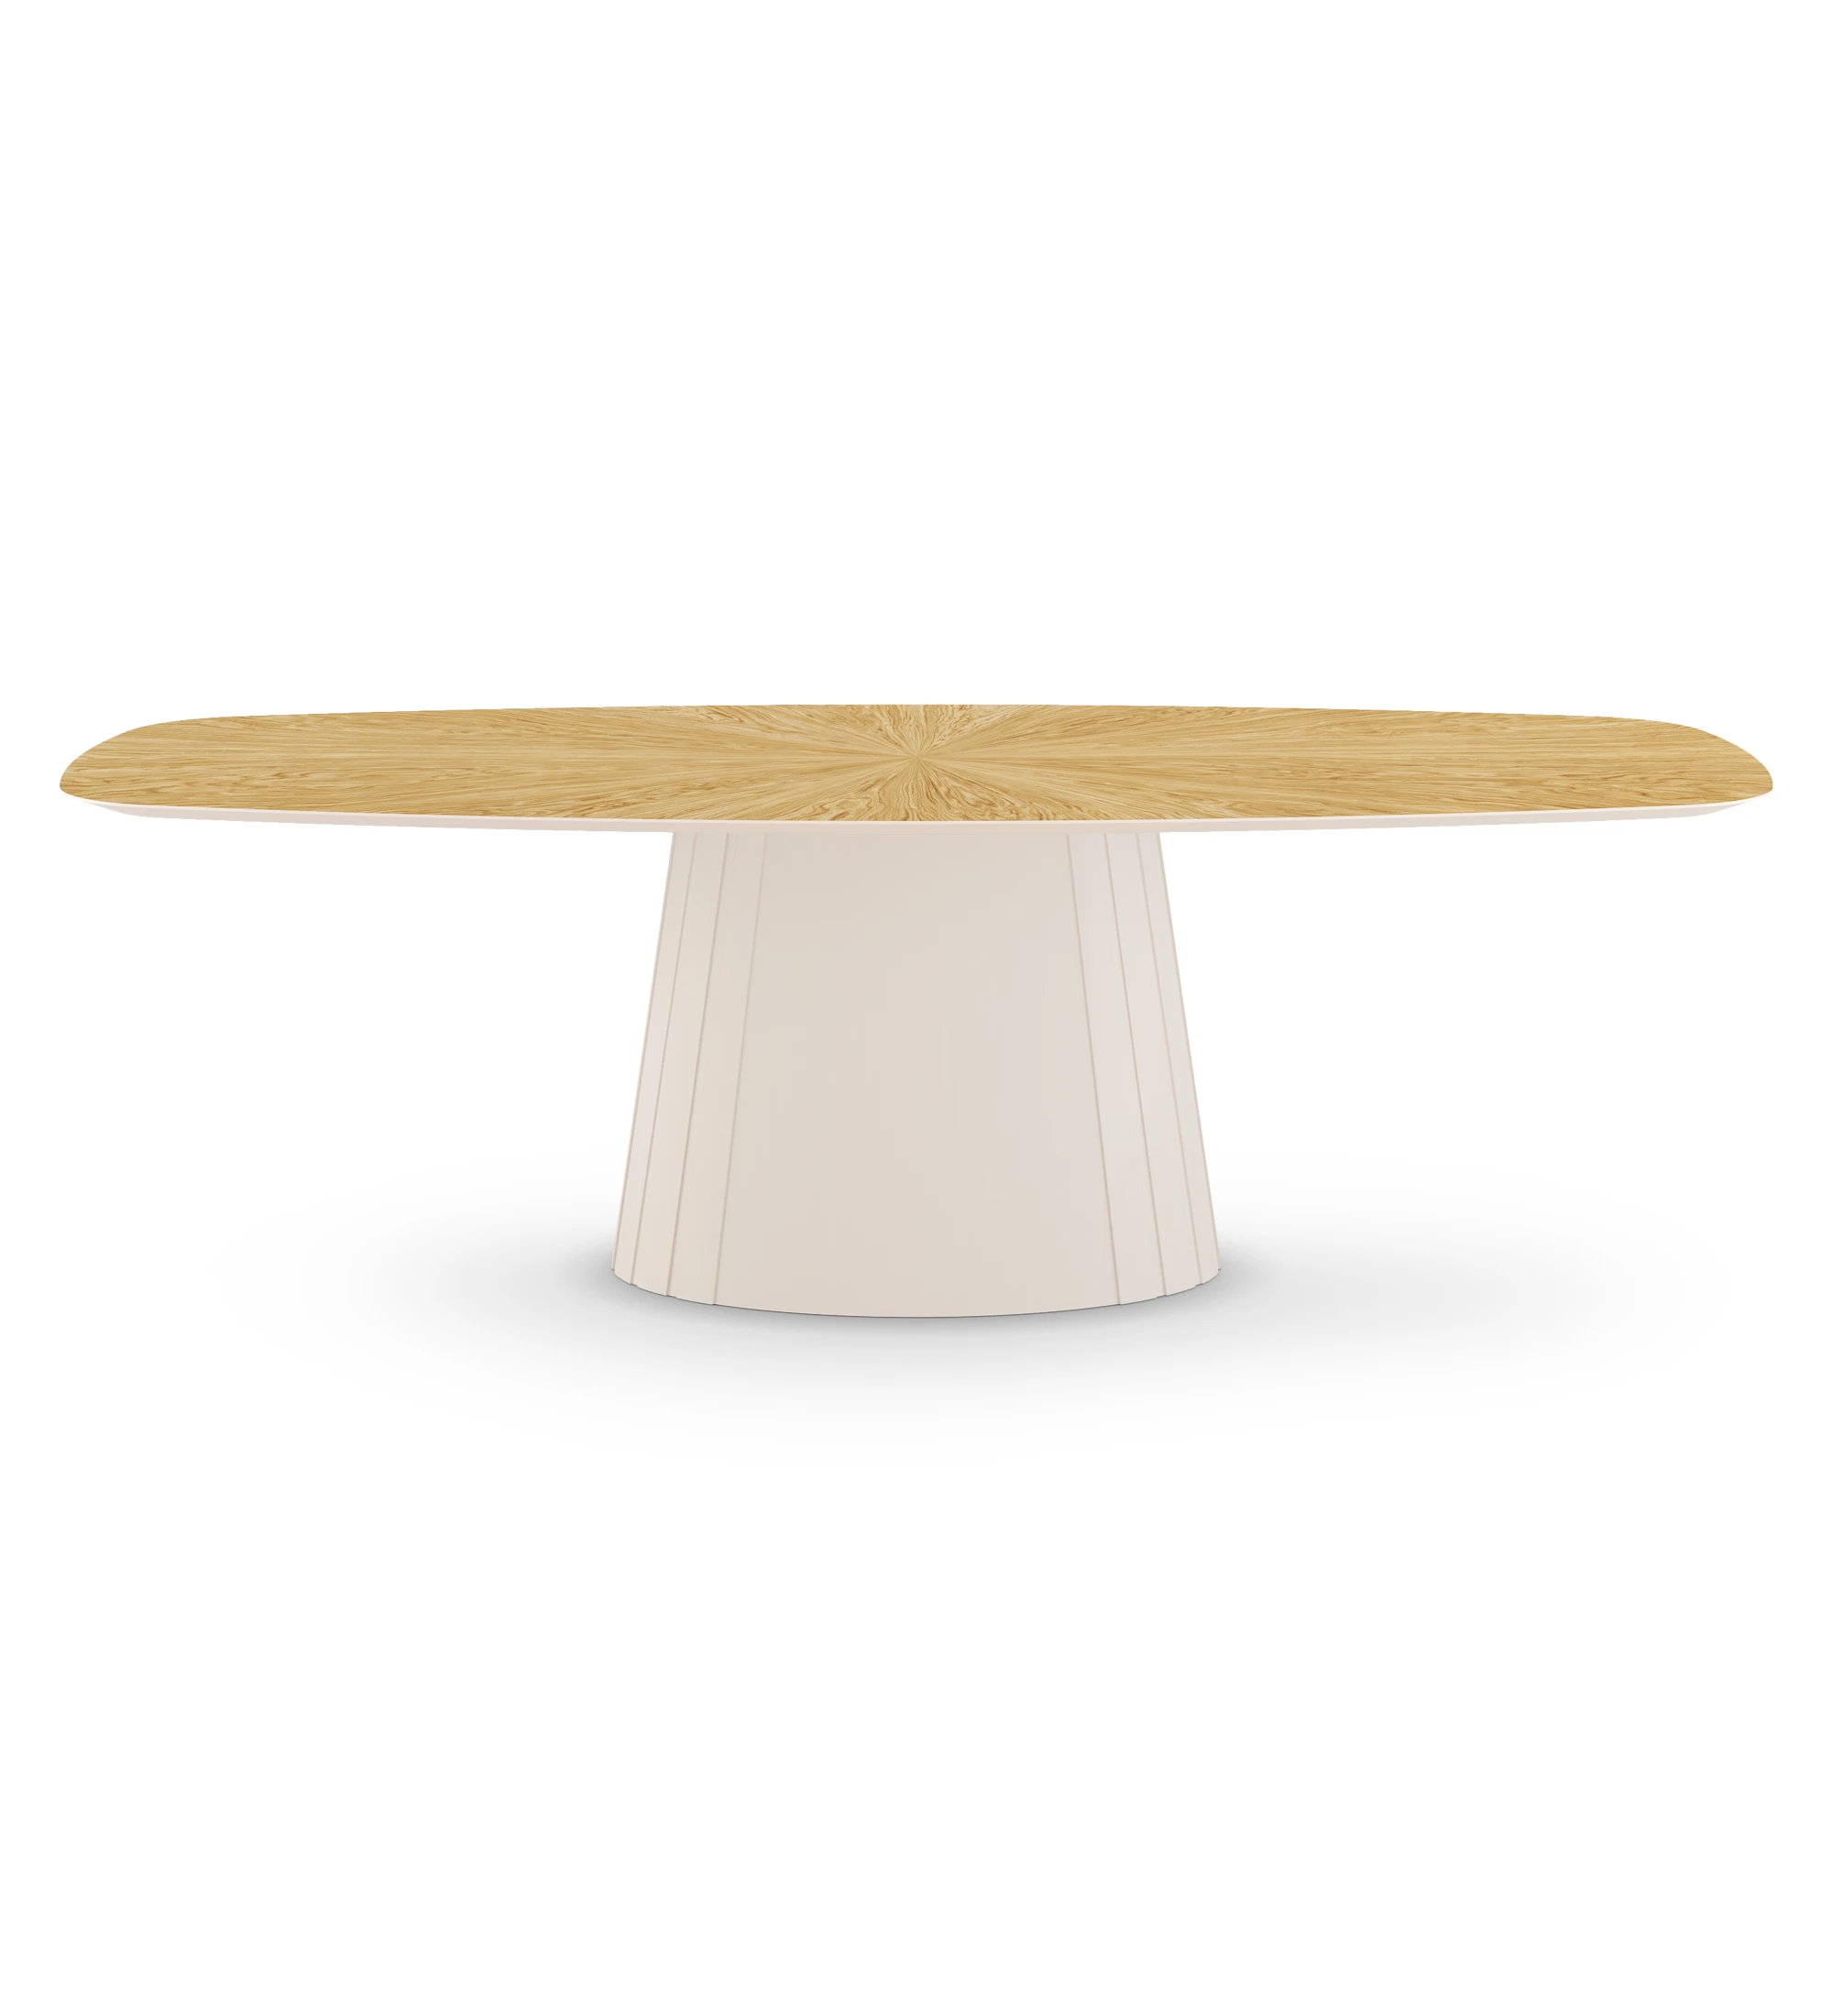 Cannes oval dining table 250 x 110 cm, natural oak top, pearl lacquered foot.